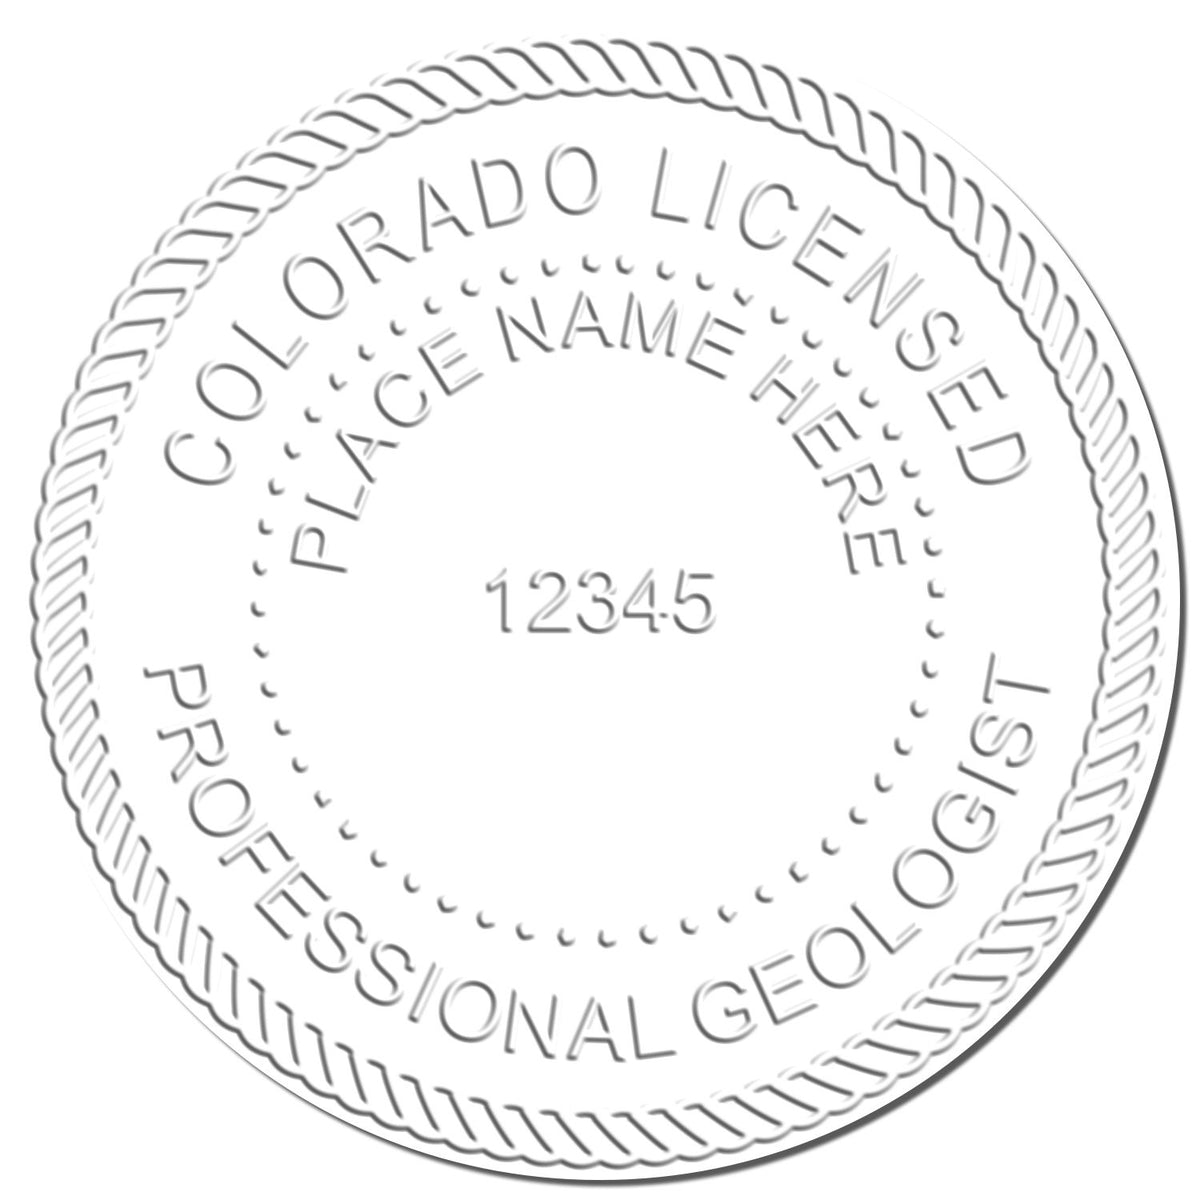 A photograph of the Hybrid Colorado Geologist Seal stamp impression reveals a vivid, professional image of the on paper.